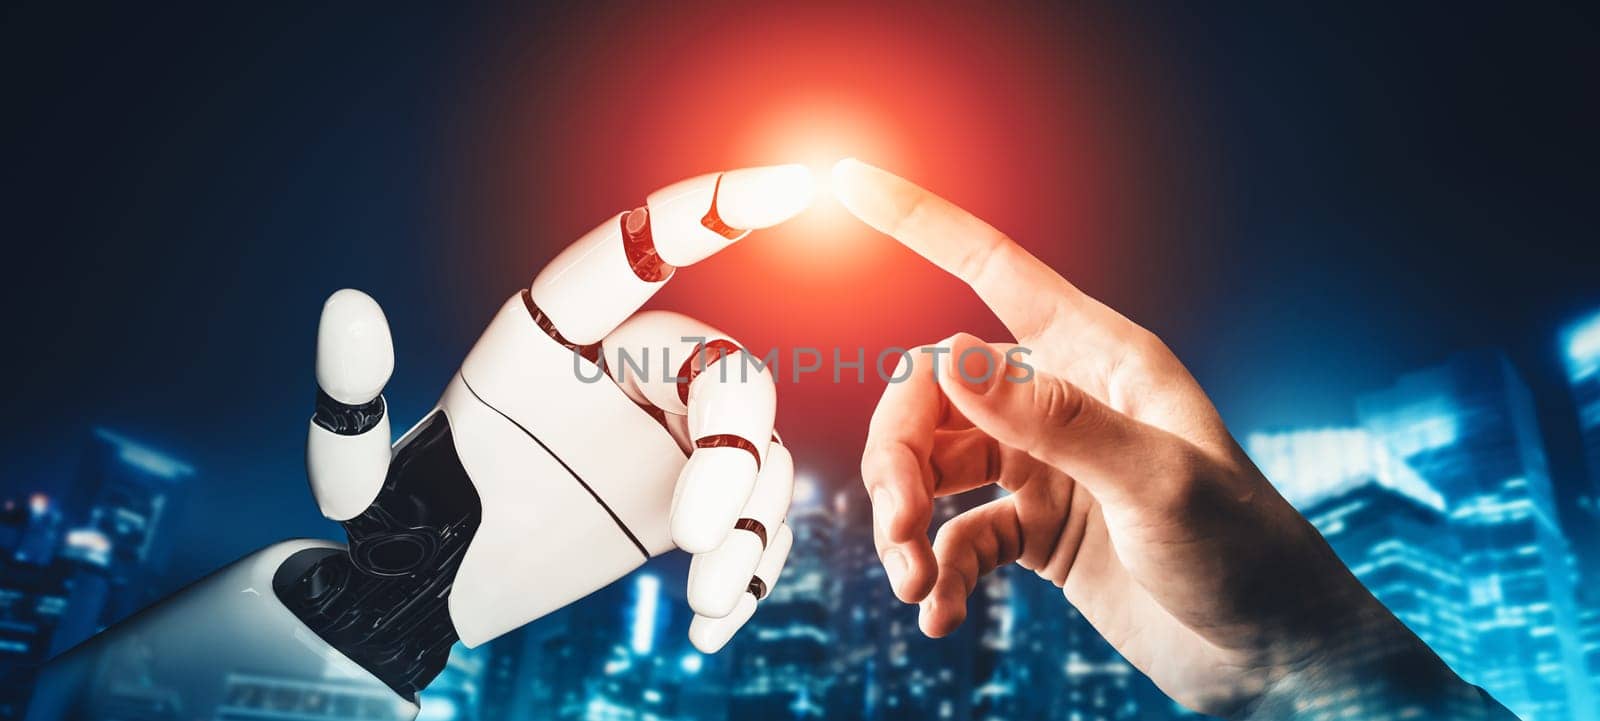 XAI 3D rendering futuristic droid robot technology development, artificial intelligence AI, and machine learning concept. Global robotic bionic science research for future of human life.